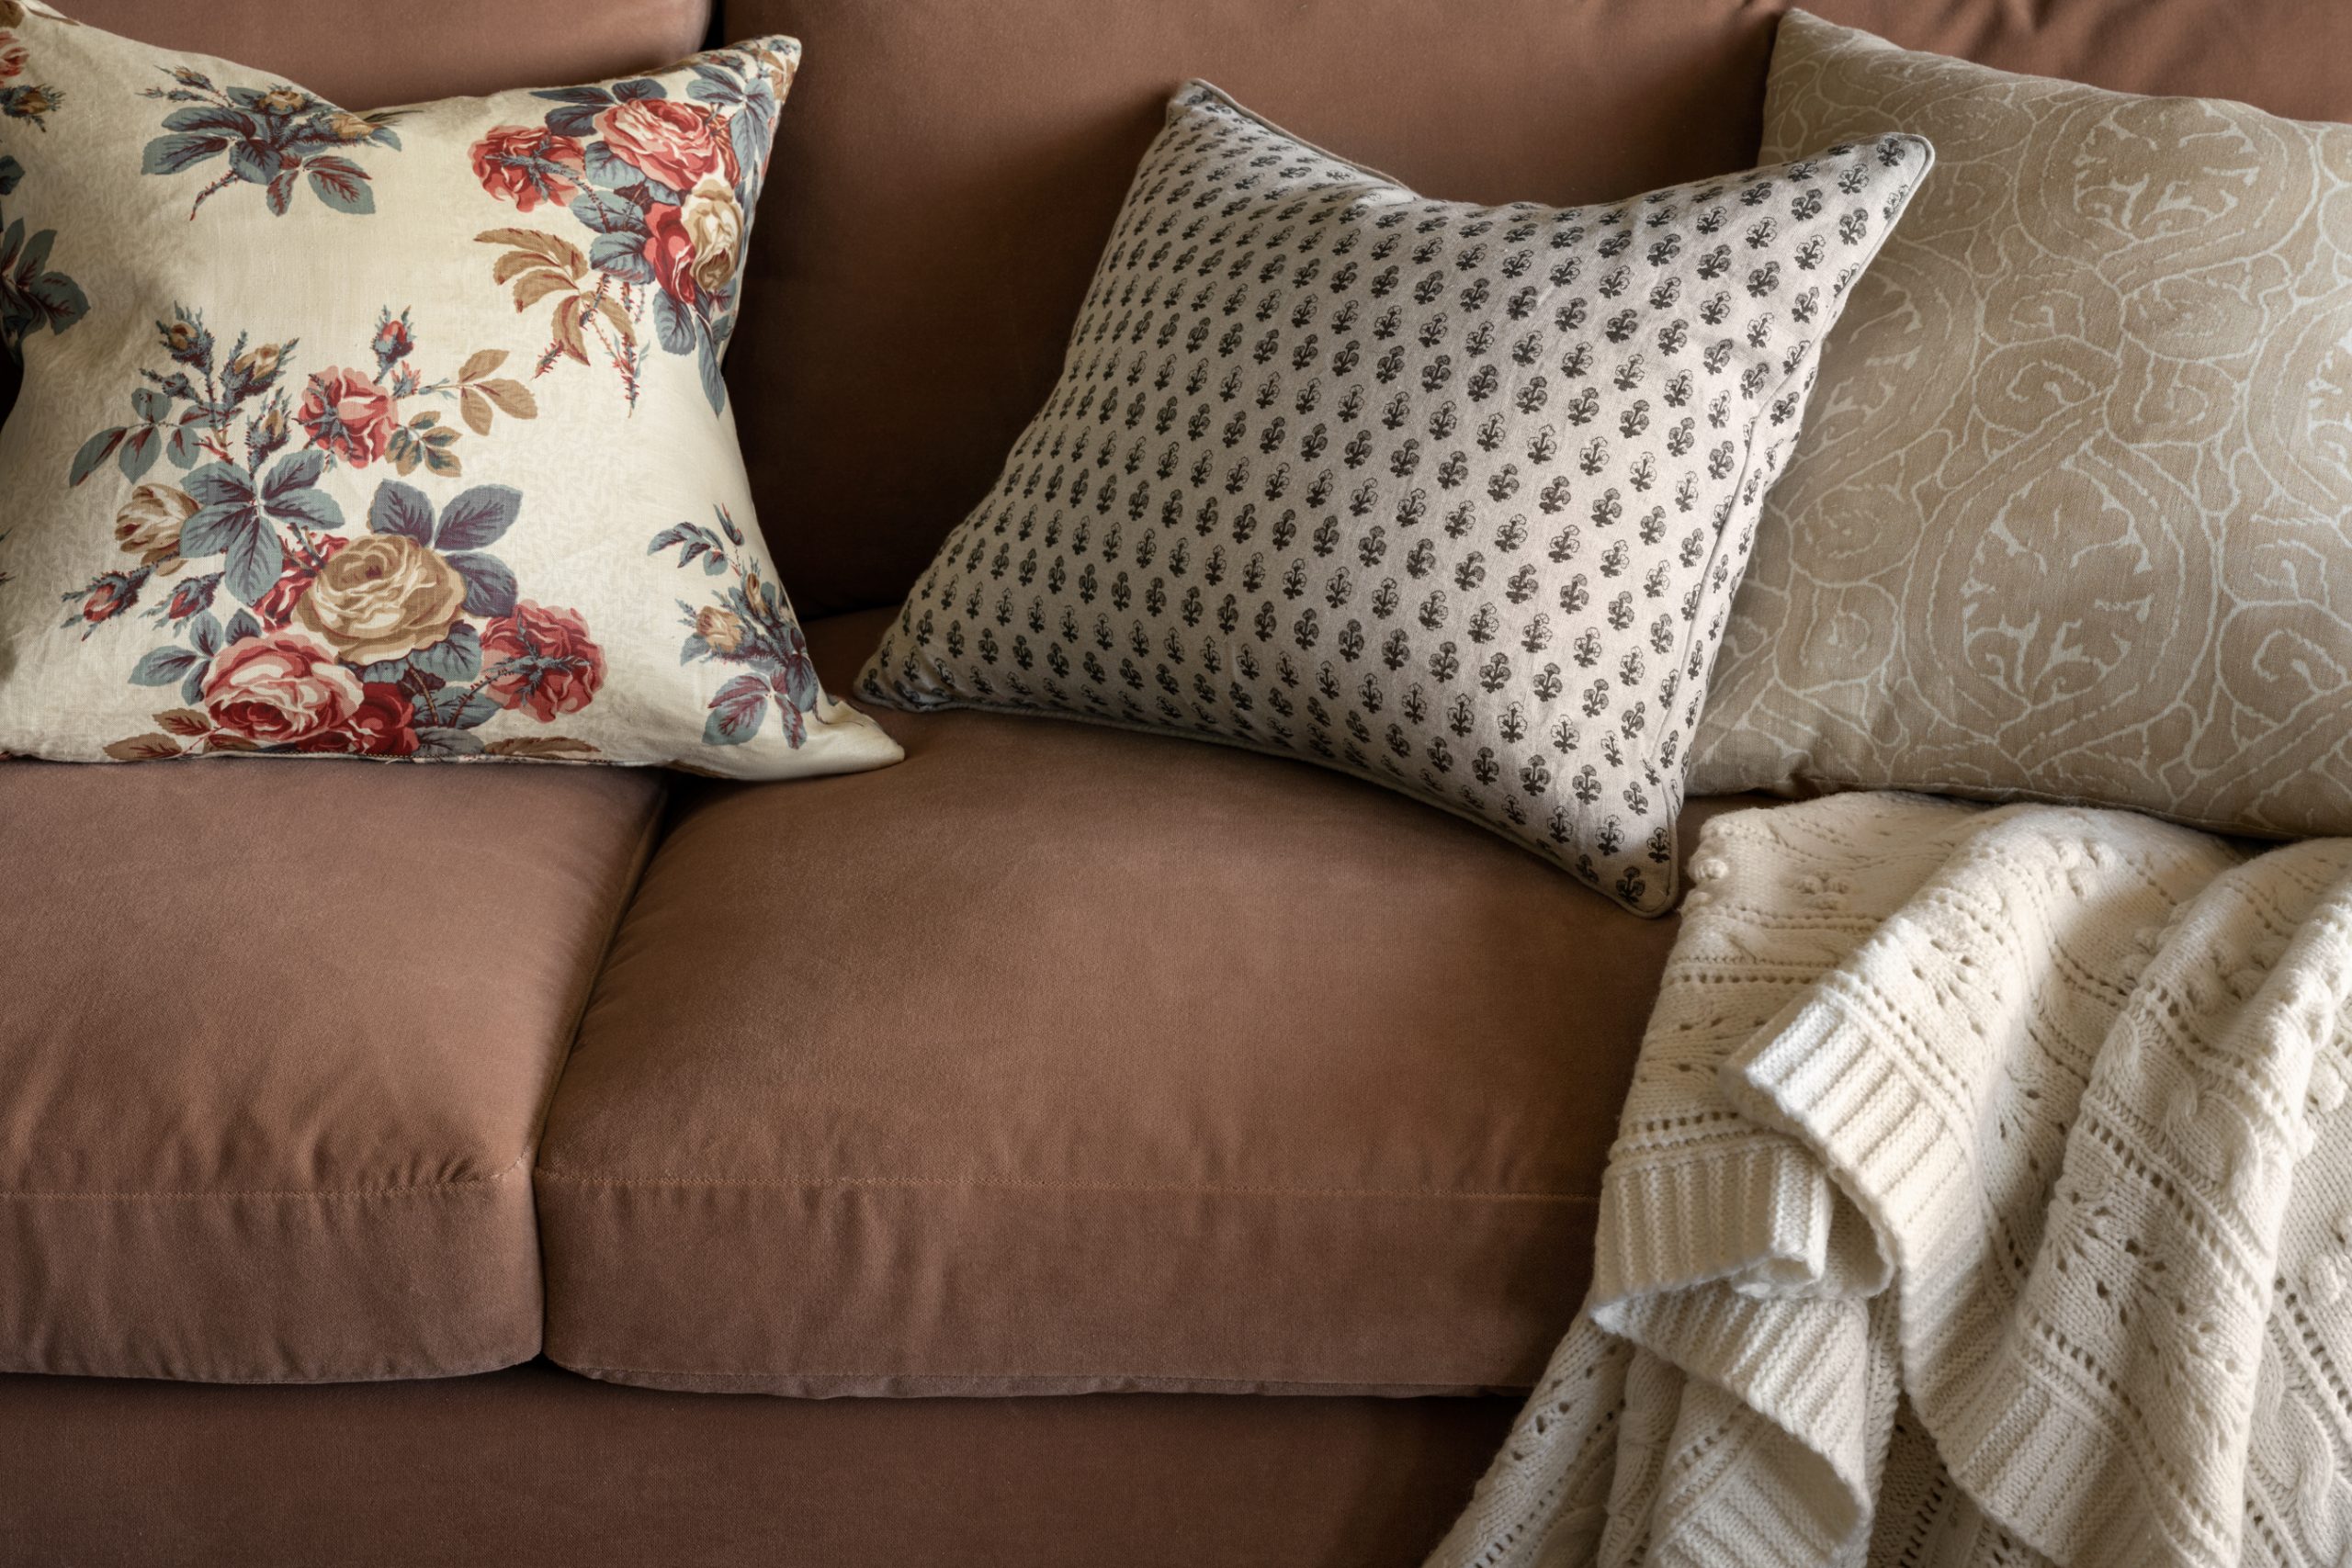 velvet couch with patterned pillows